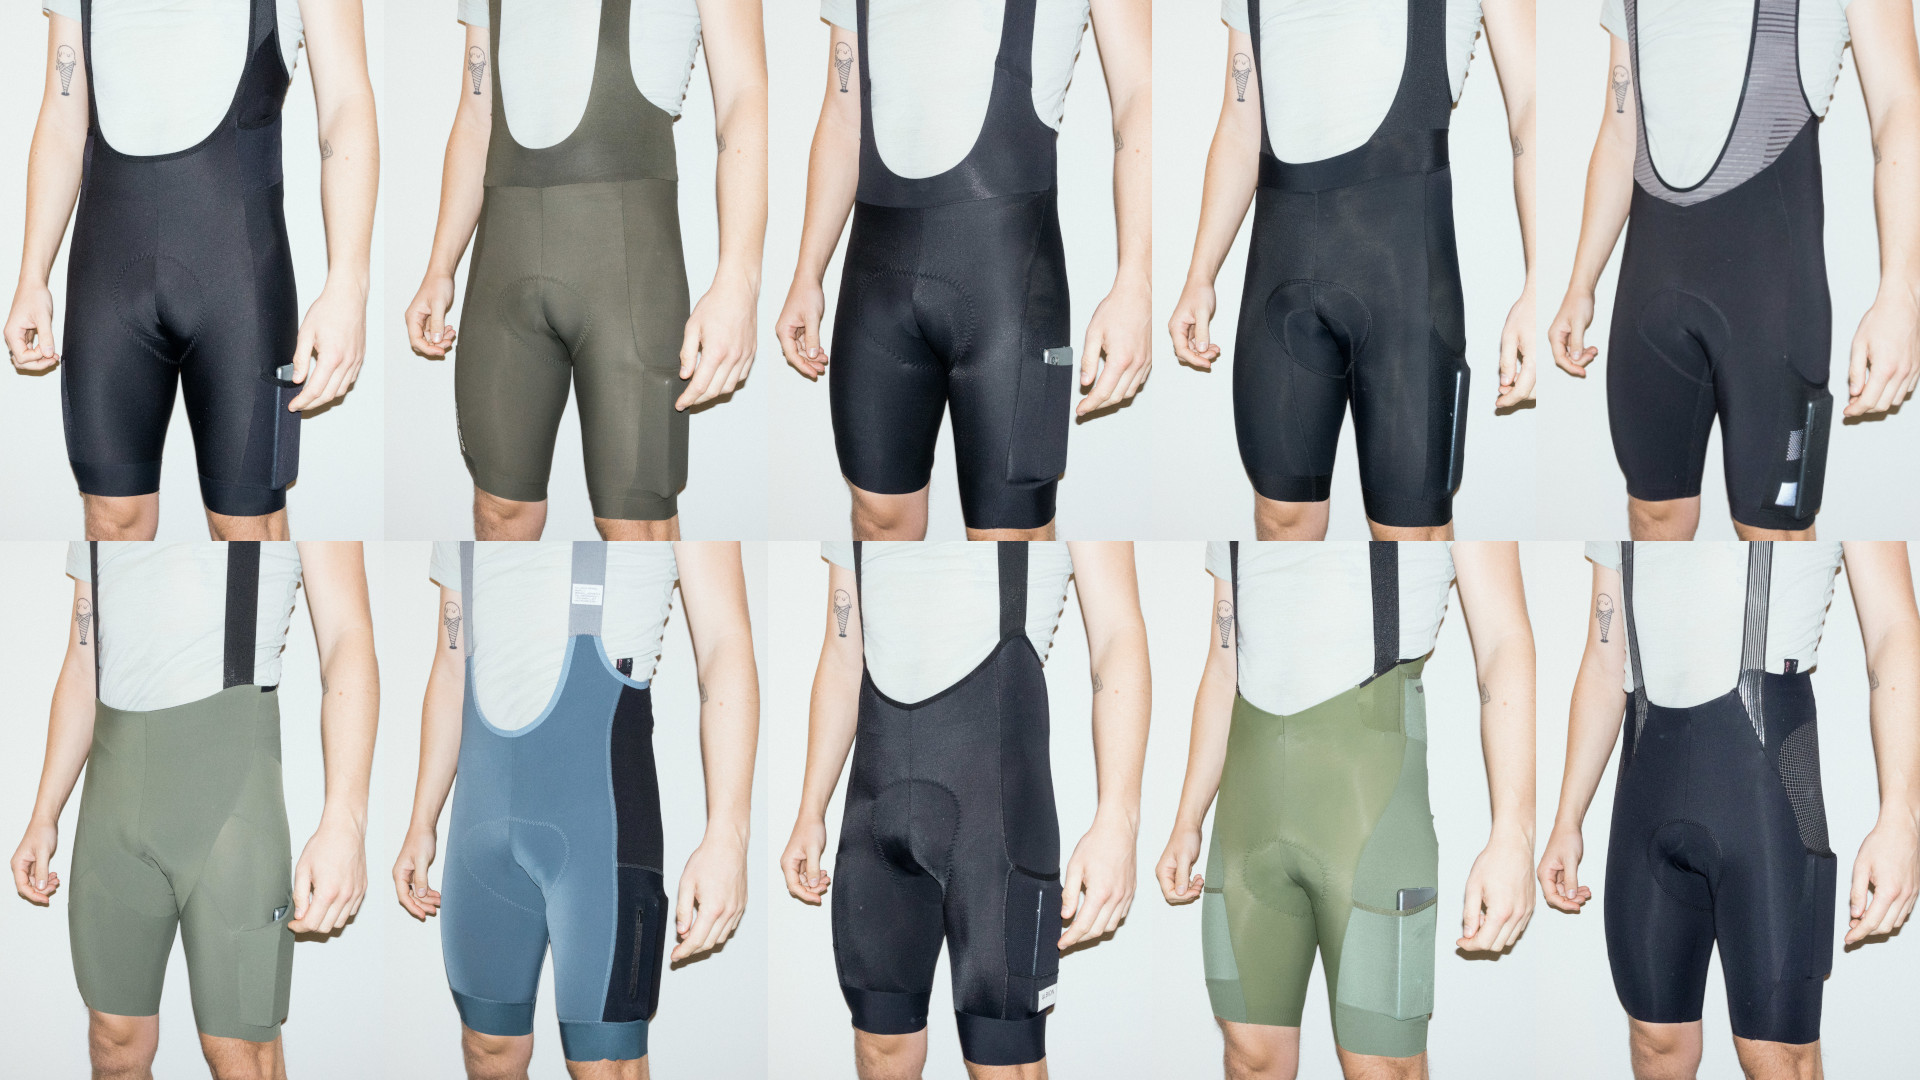 seamless cycling underwear, seamless cycling underwear Suppliers